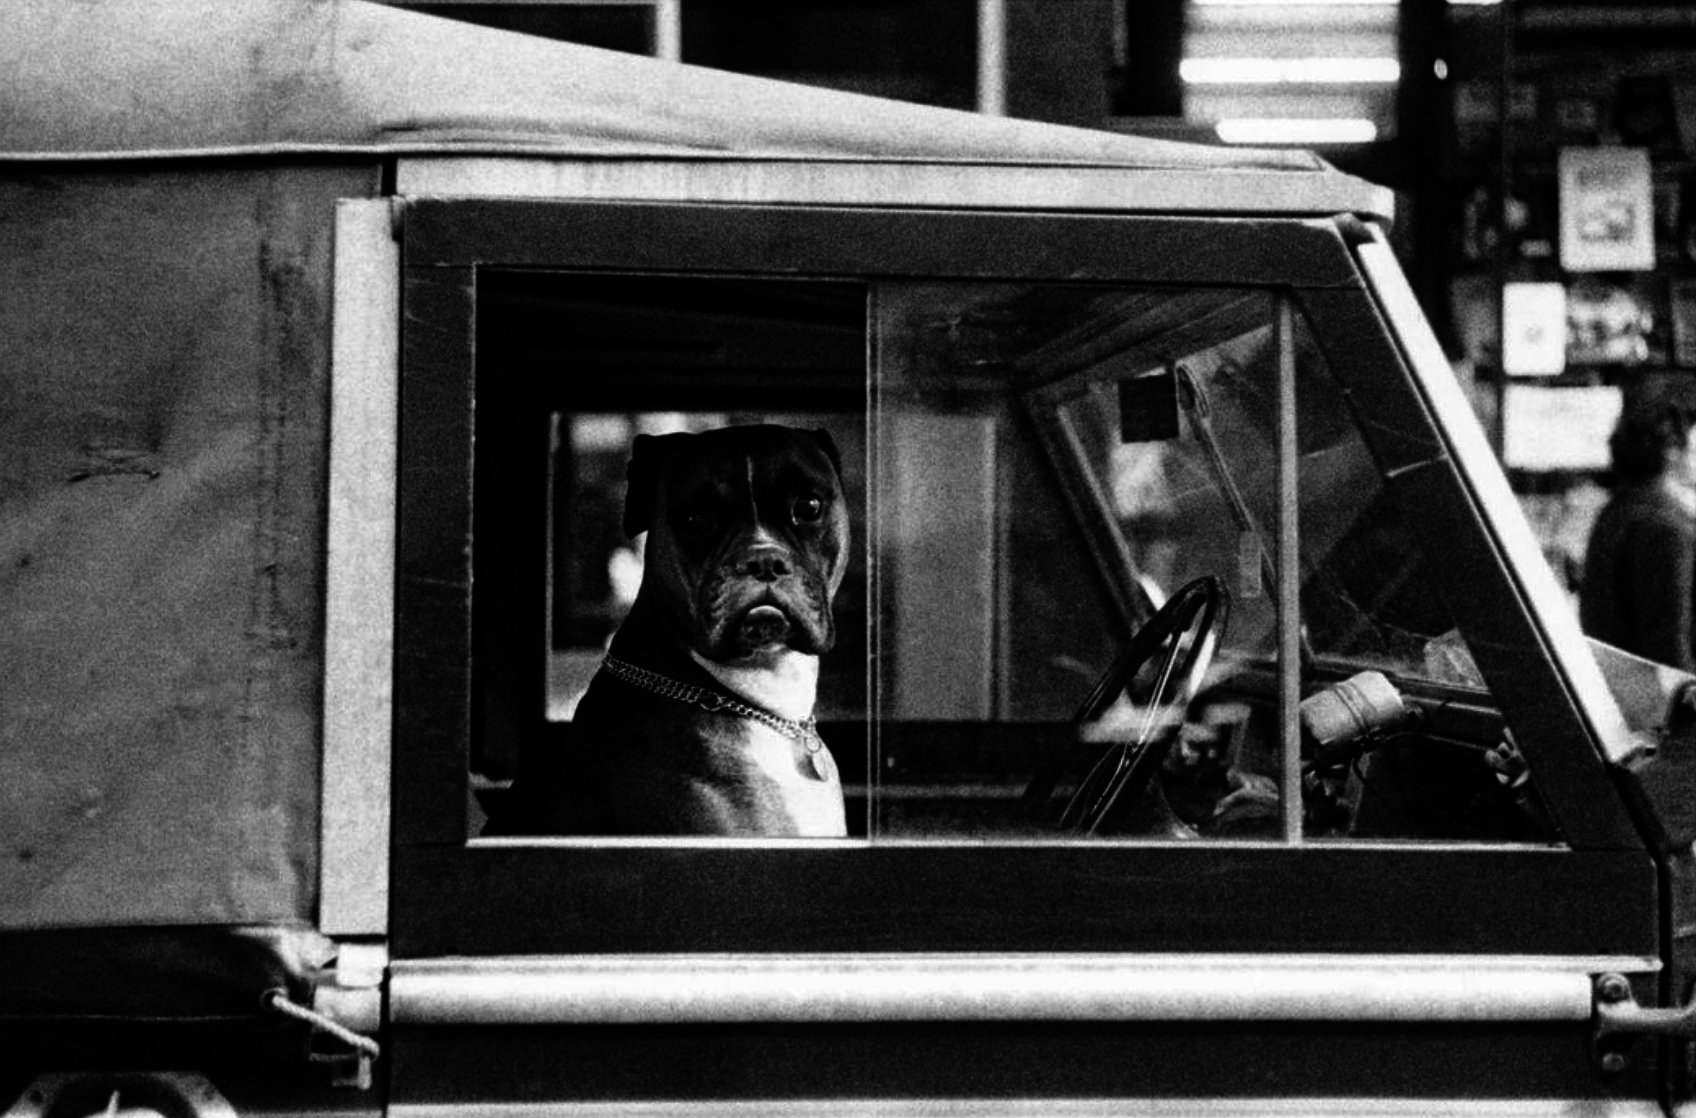 Dog seen sitting in the front seat and looking out the window of an older car